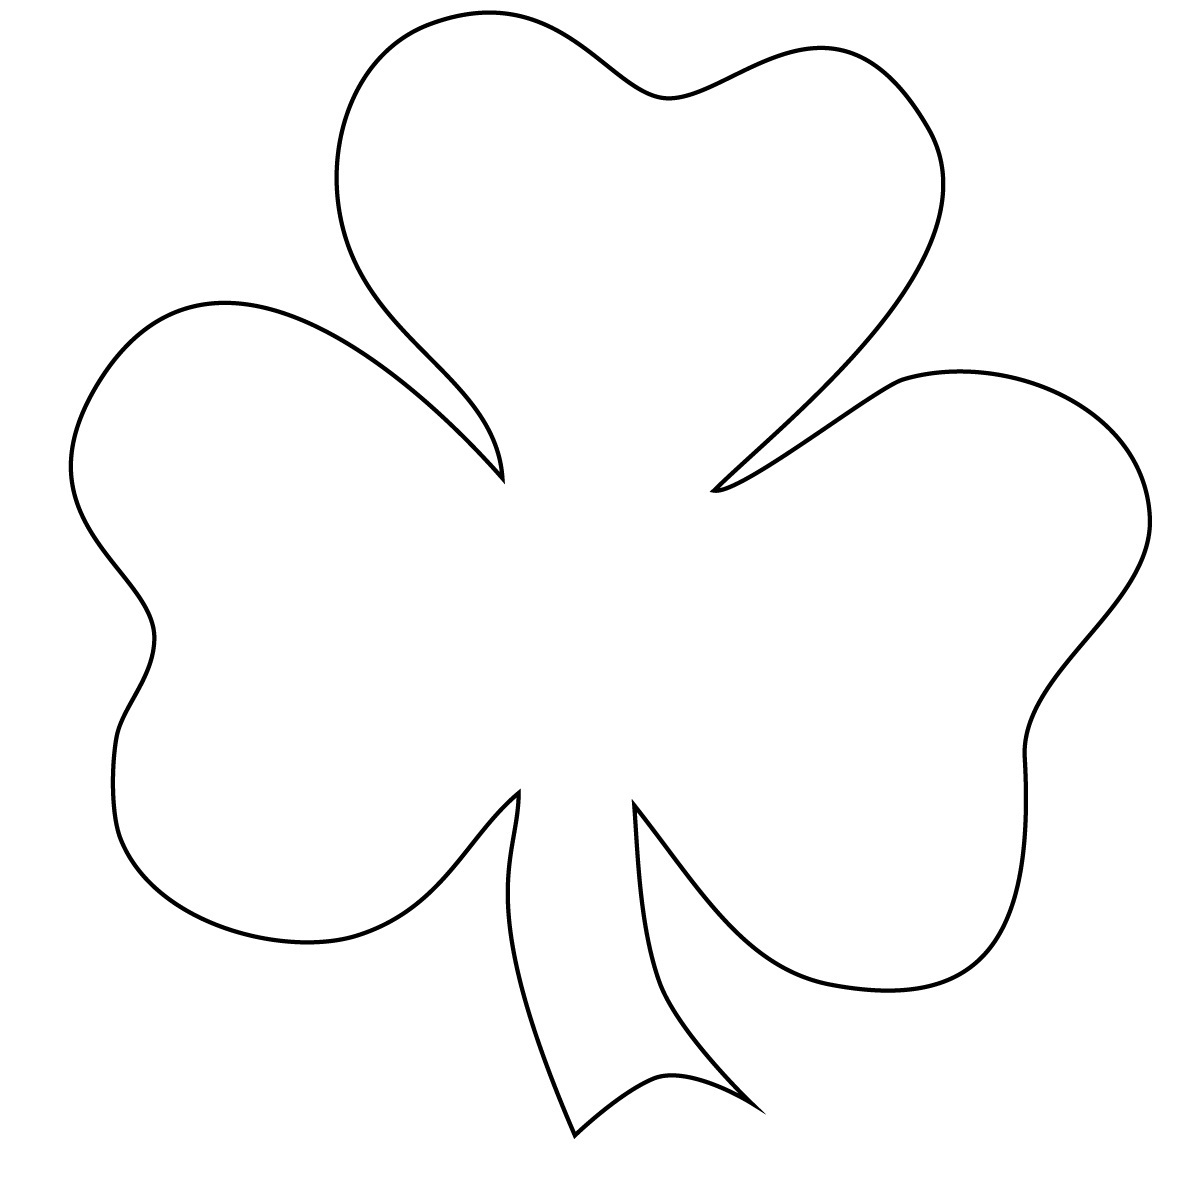 free-printable-shamrock-coloring-pages-for-kids